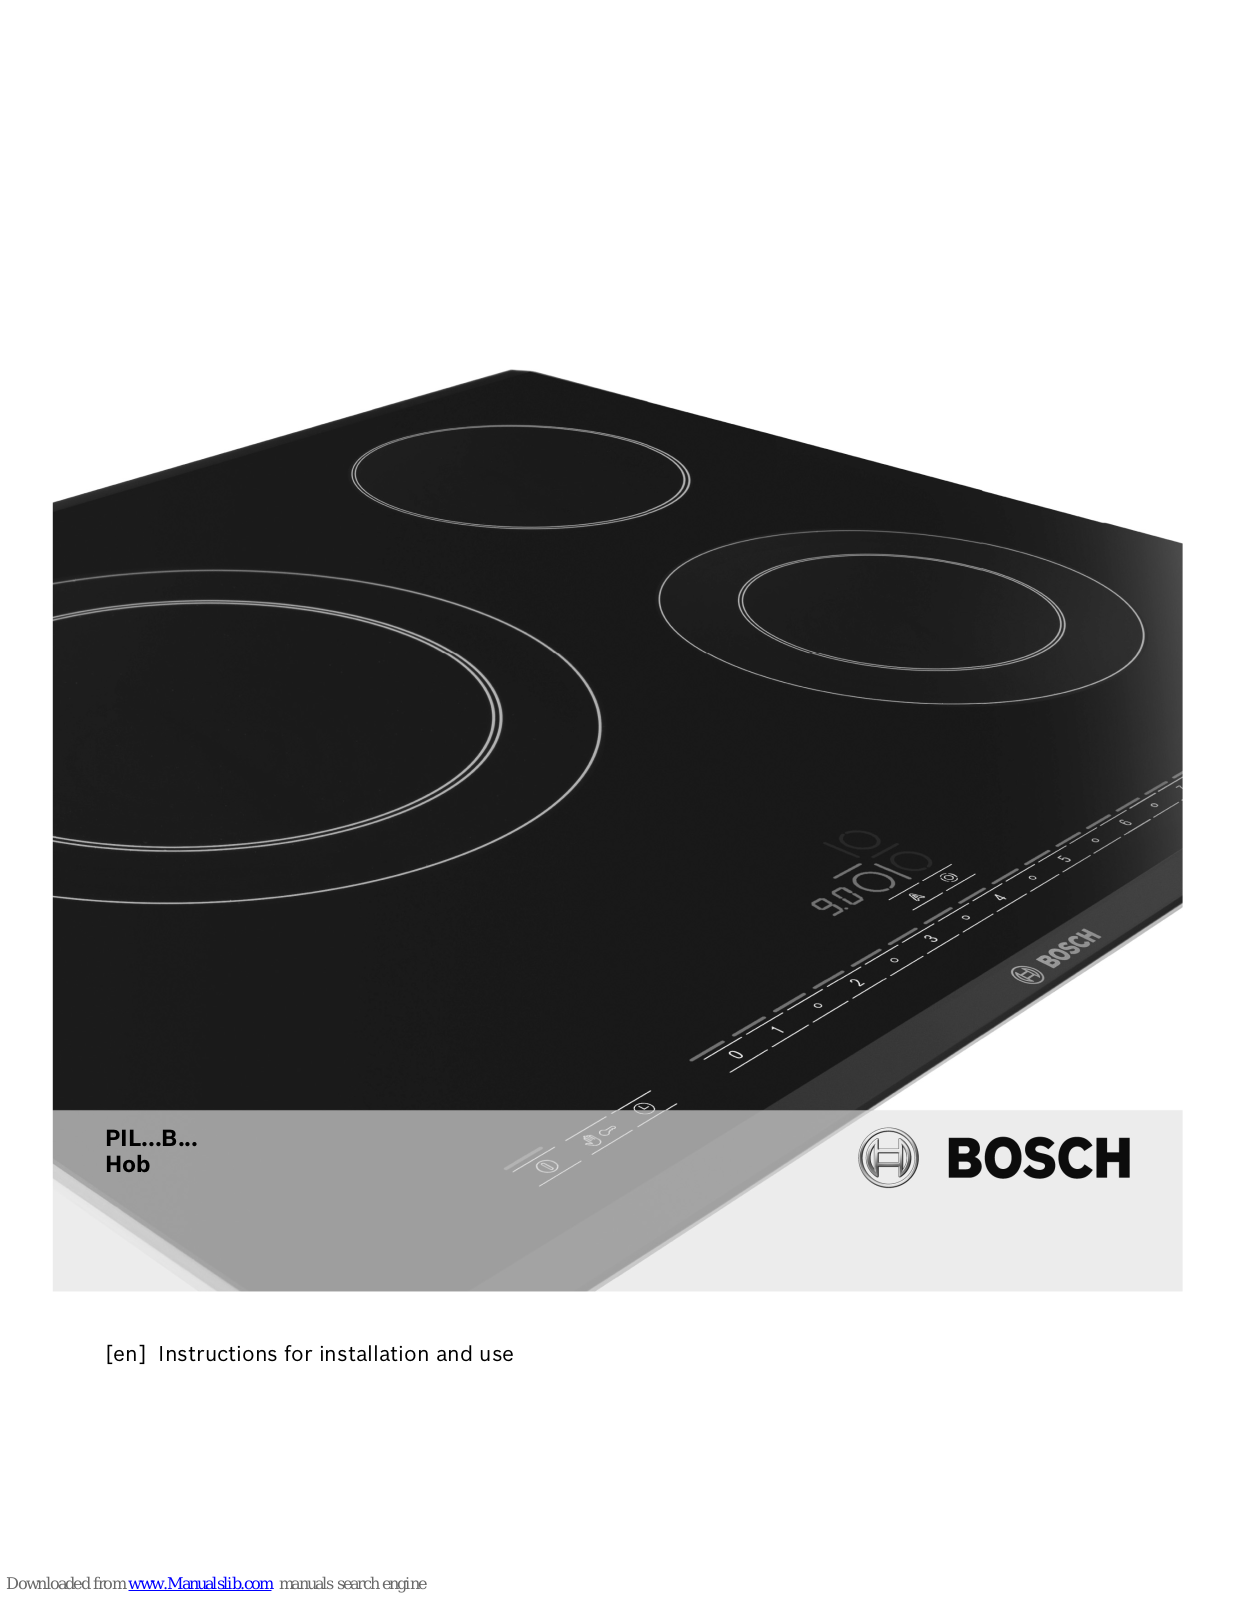 Bosch PIL...B Instructions For Installation And Use Manual